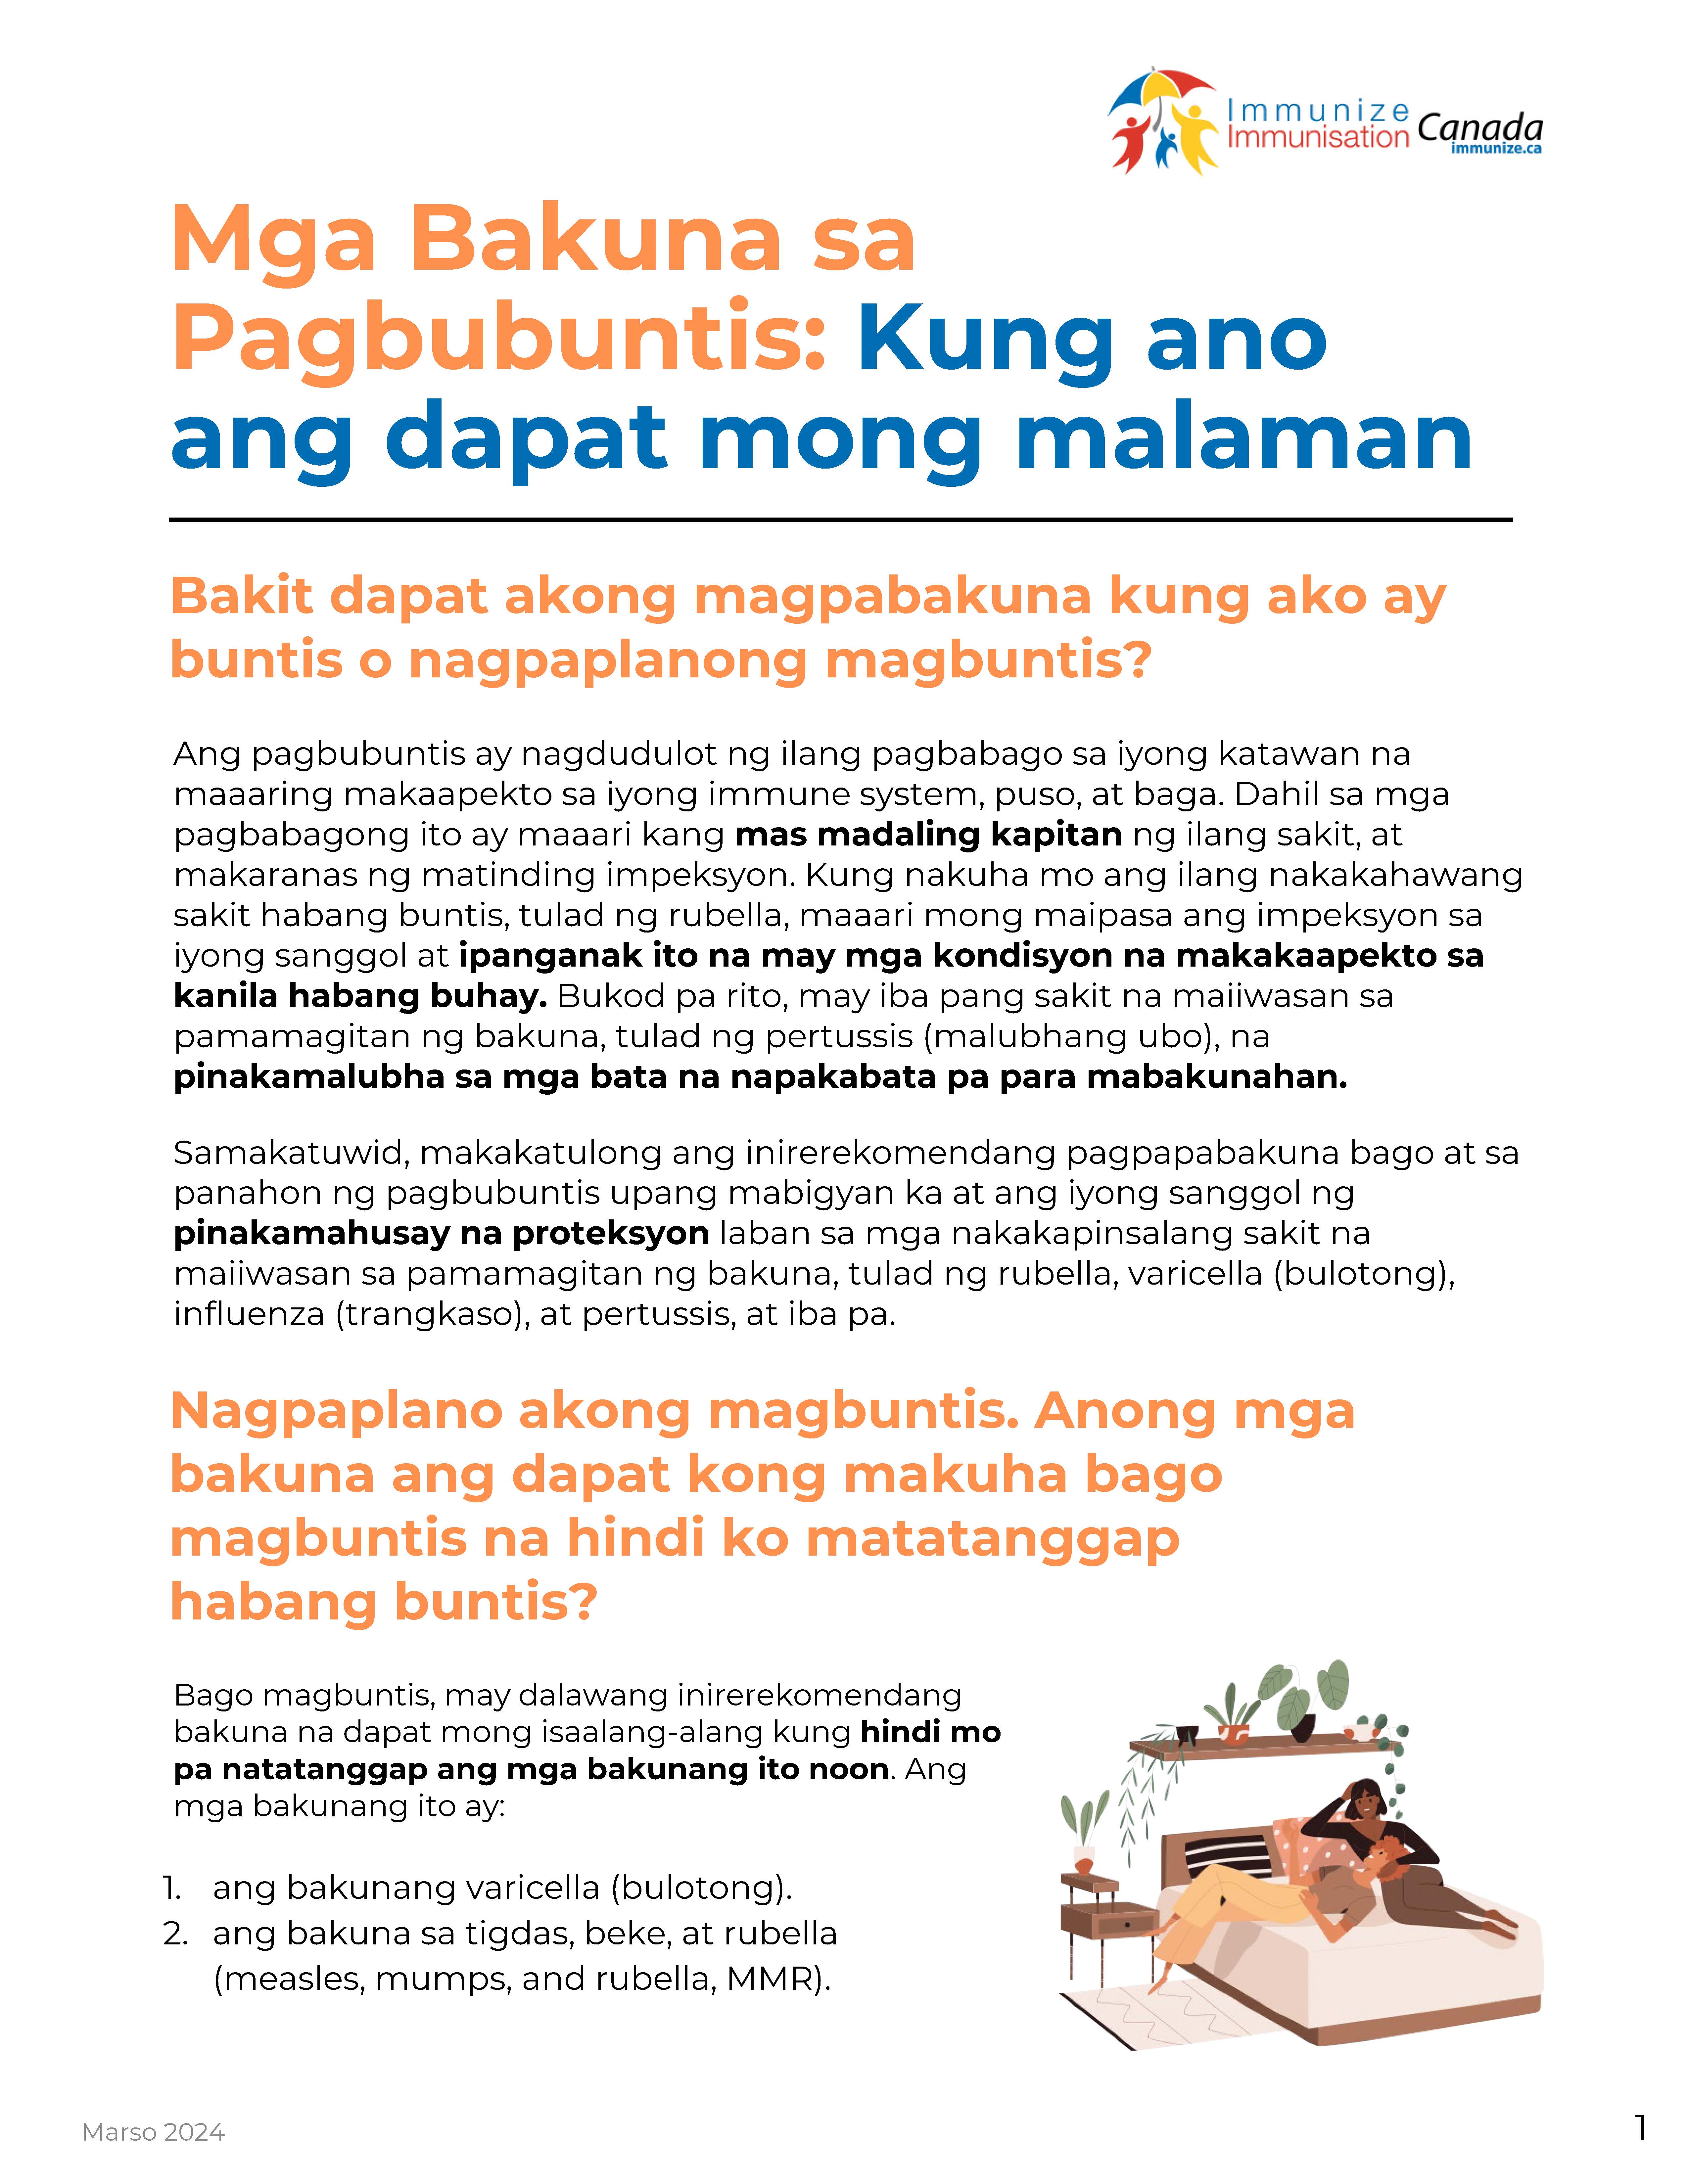 Vaccines in Pregnancy: What you need to know (factsheet in Tagalog)